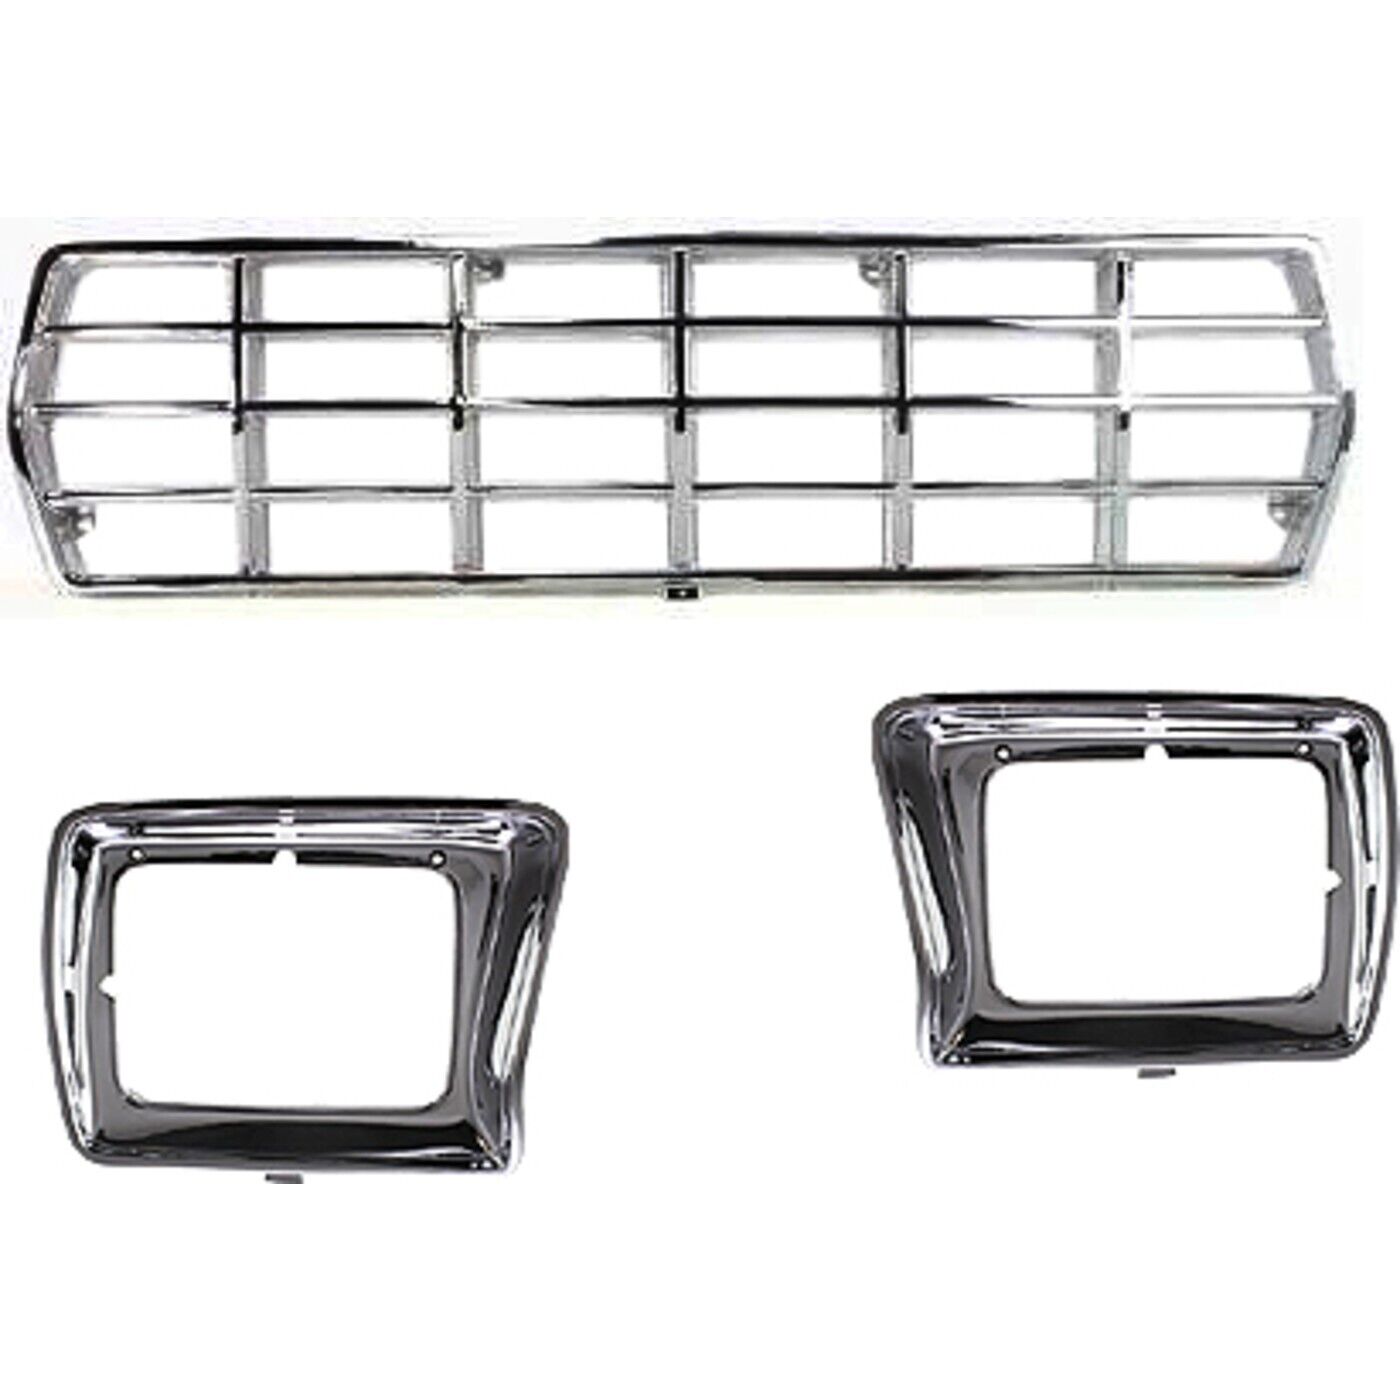 Grille Headlight Door Kit For 1978-79 Ford F-150 Bronco Chrome Shell and Insert